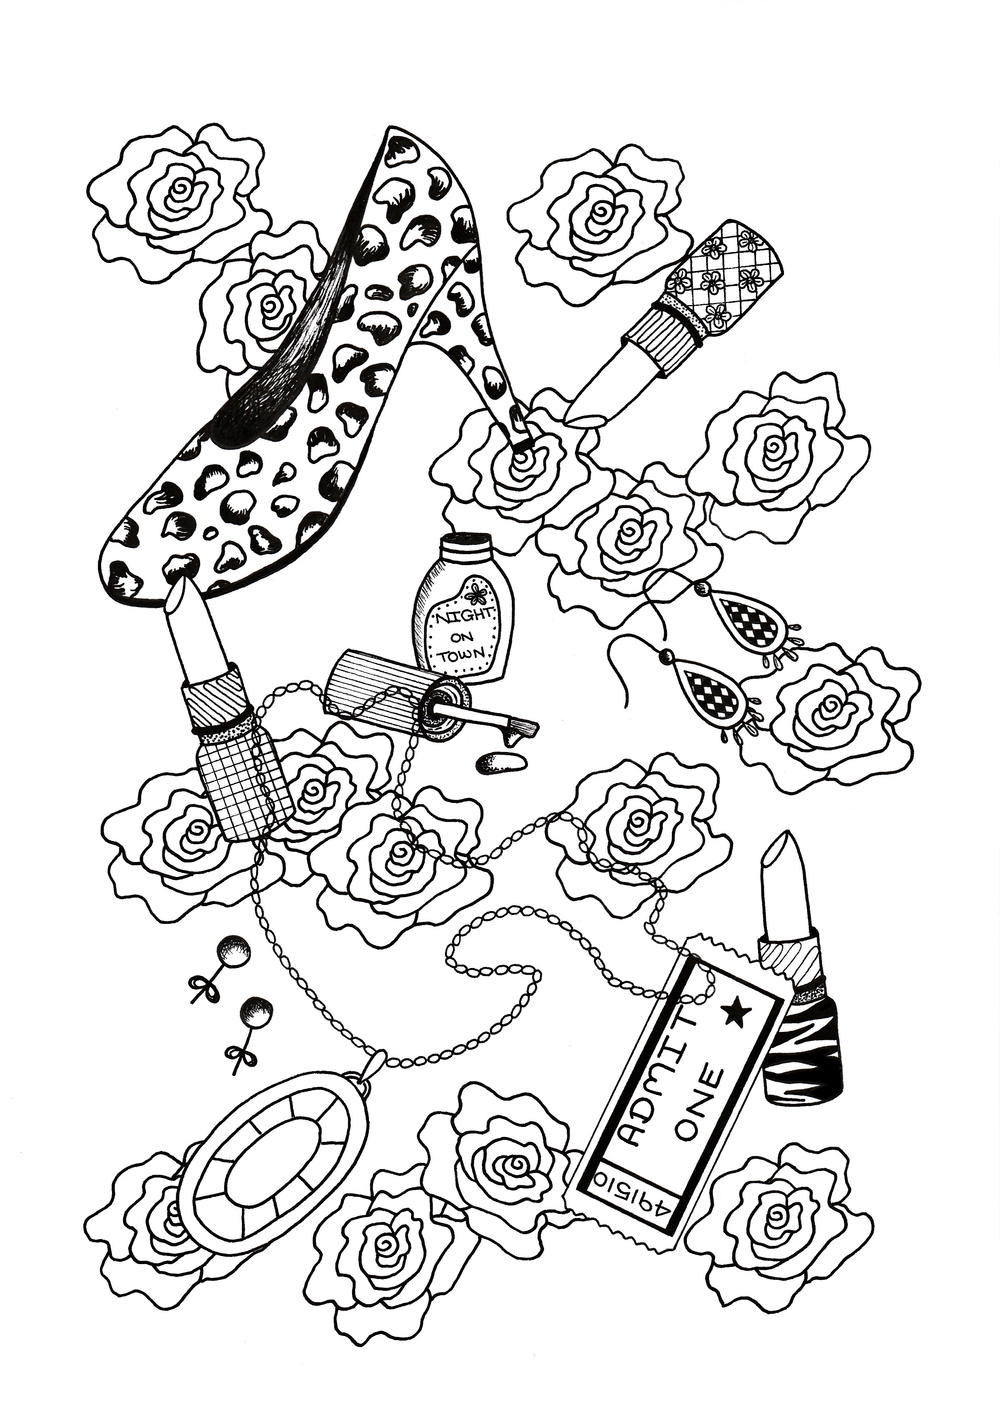 Night Out Adult Coloring Page | FaveCrafts.com